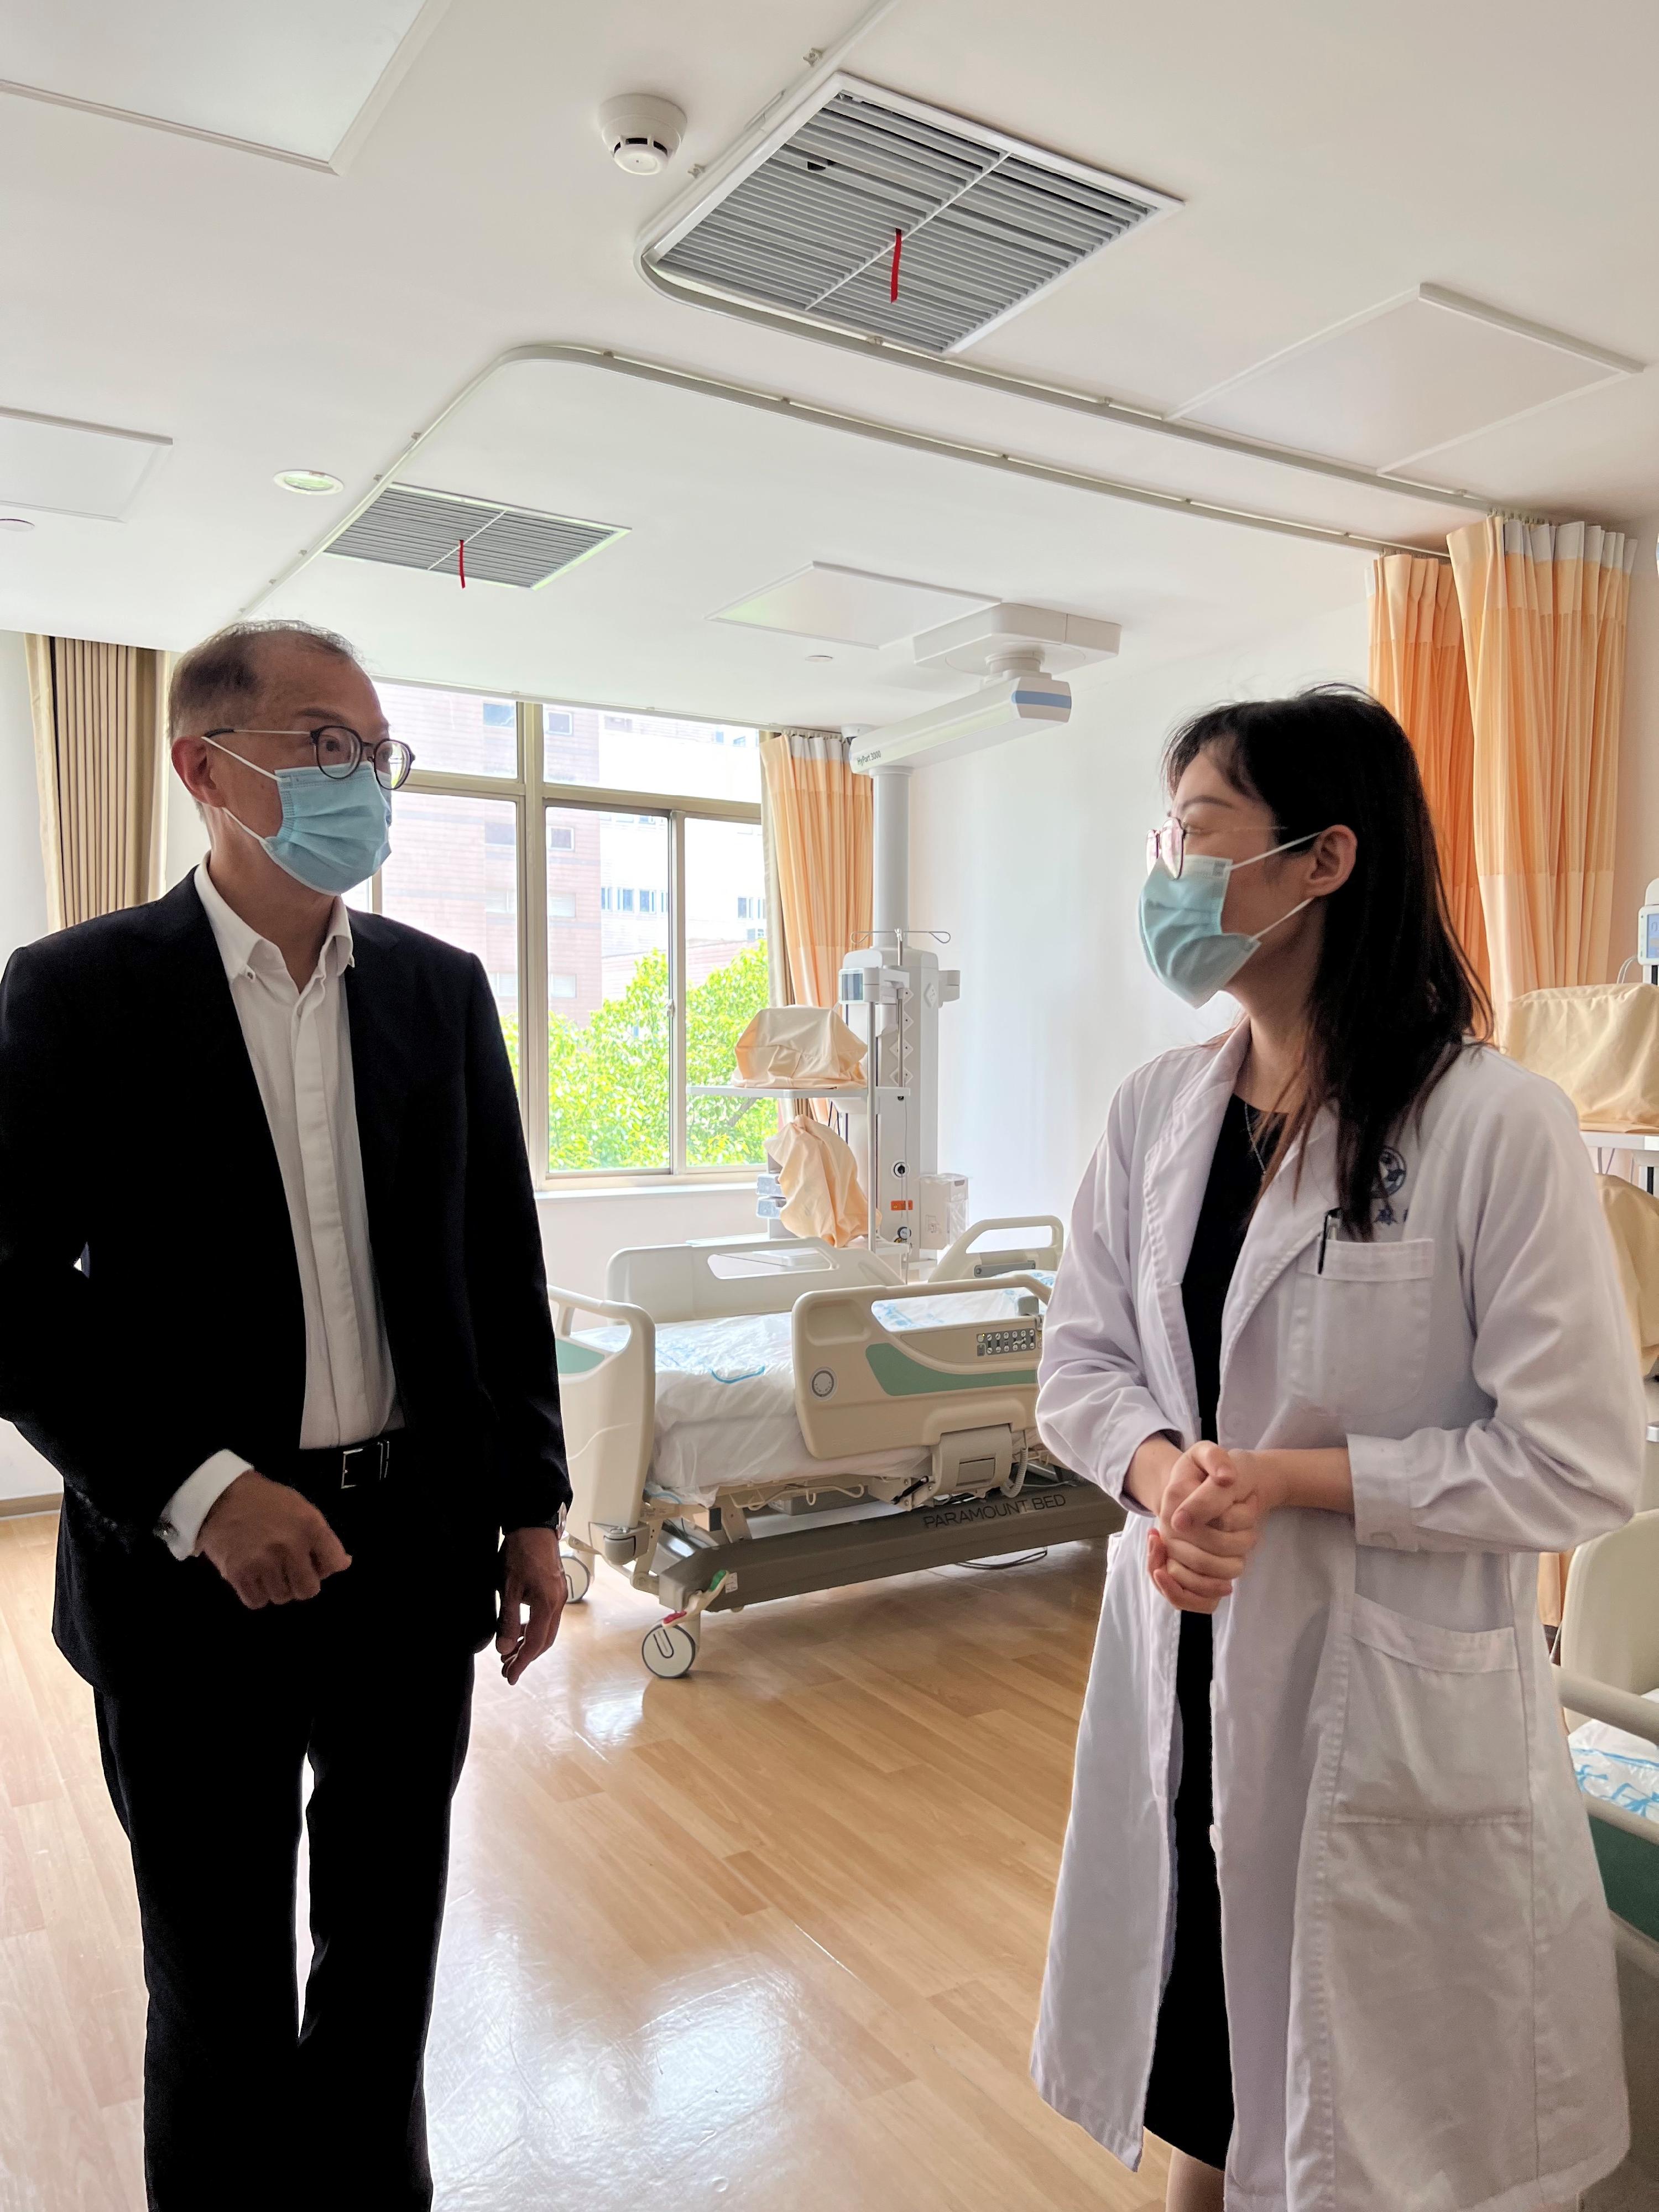 The Secretary for Health, Professor Lo Chung-mau (left), visits the Clinical Research Unit of the Renji Hospital affiliated to Shanghai Jiao Tong University School of Medicine this morning (June 9).
